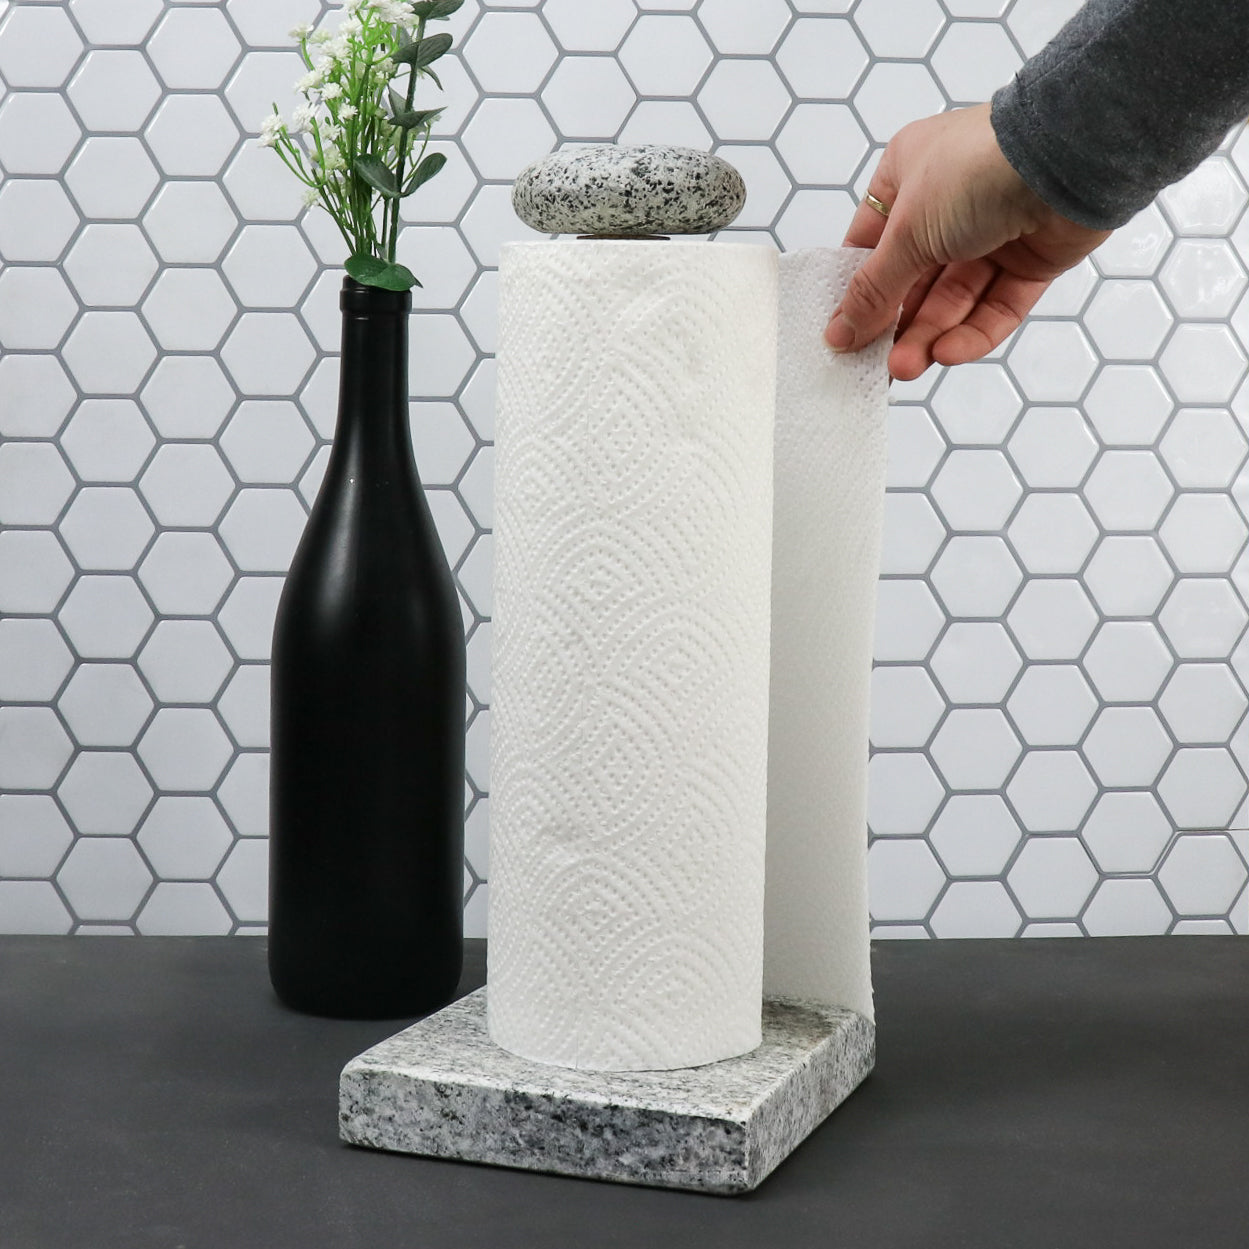 Sea Stones Helping Hand Standing Granite Paper Towel Holder - Easy to Use One-Handed Tear - Modern Kitchen Design - Made in USA